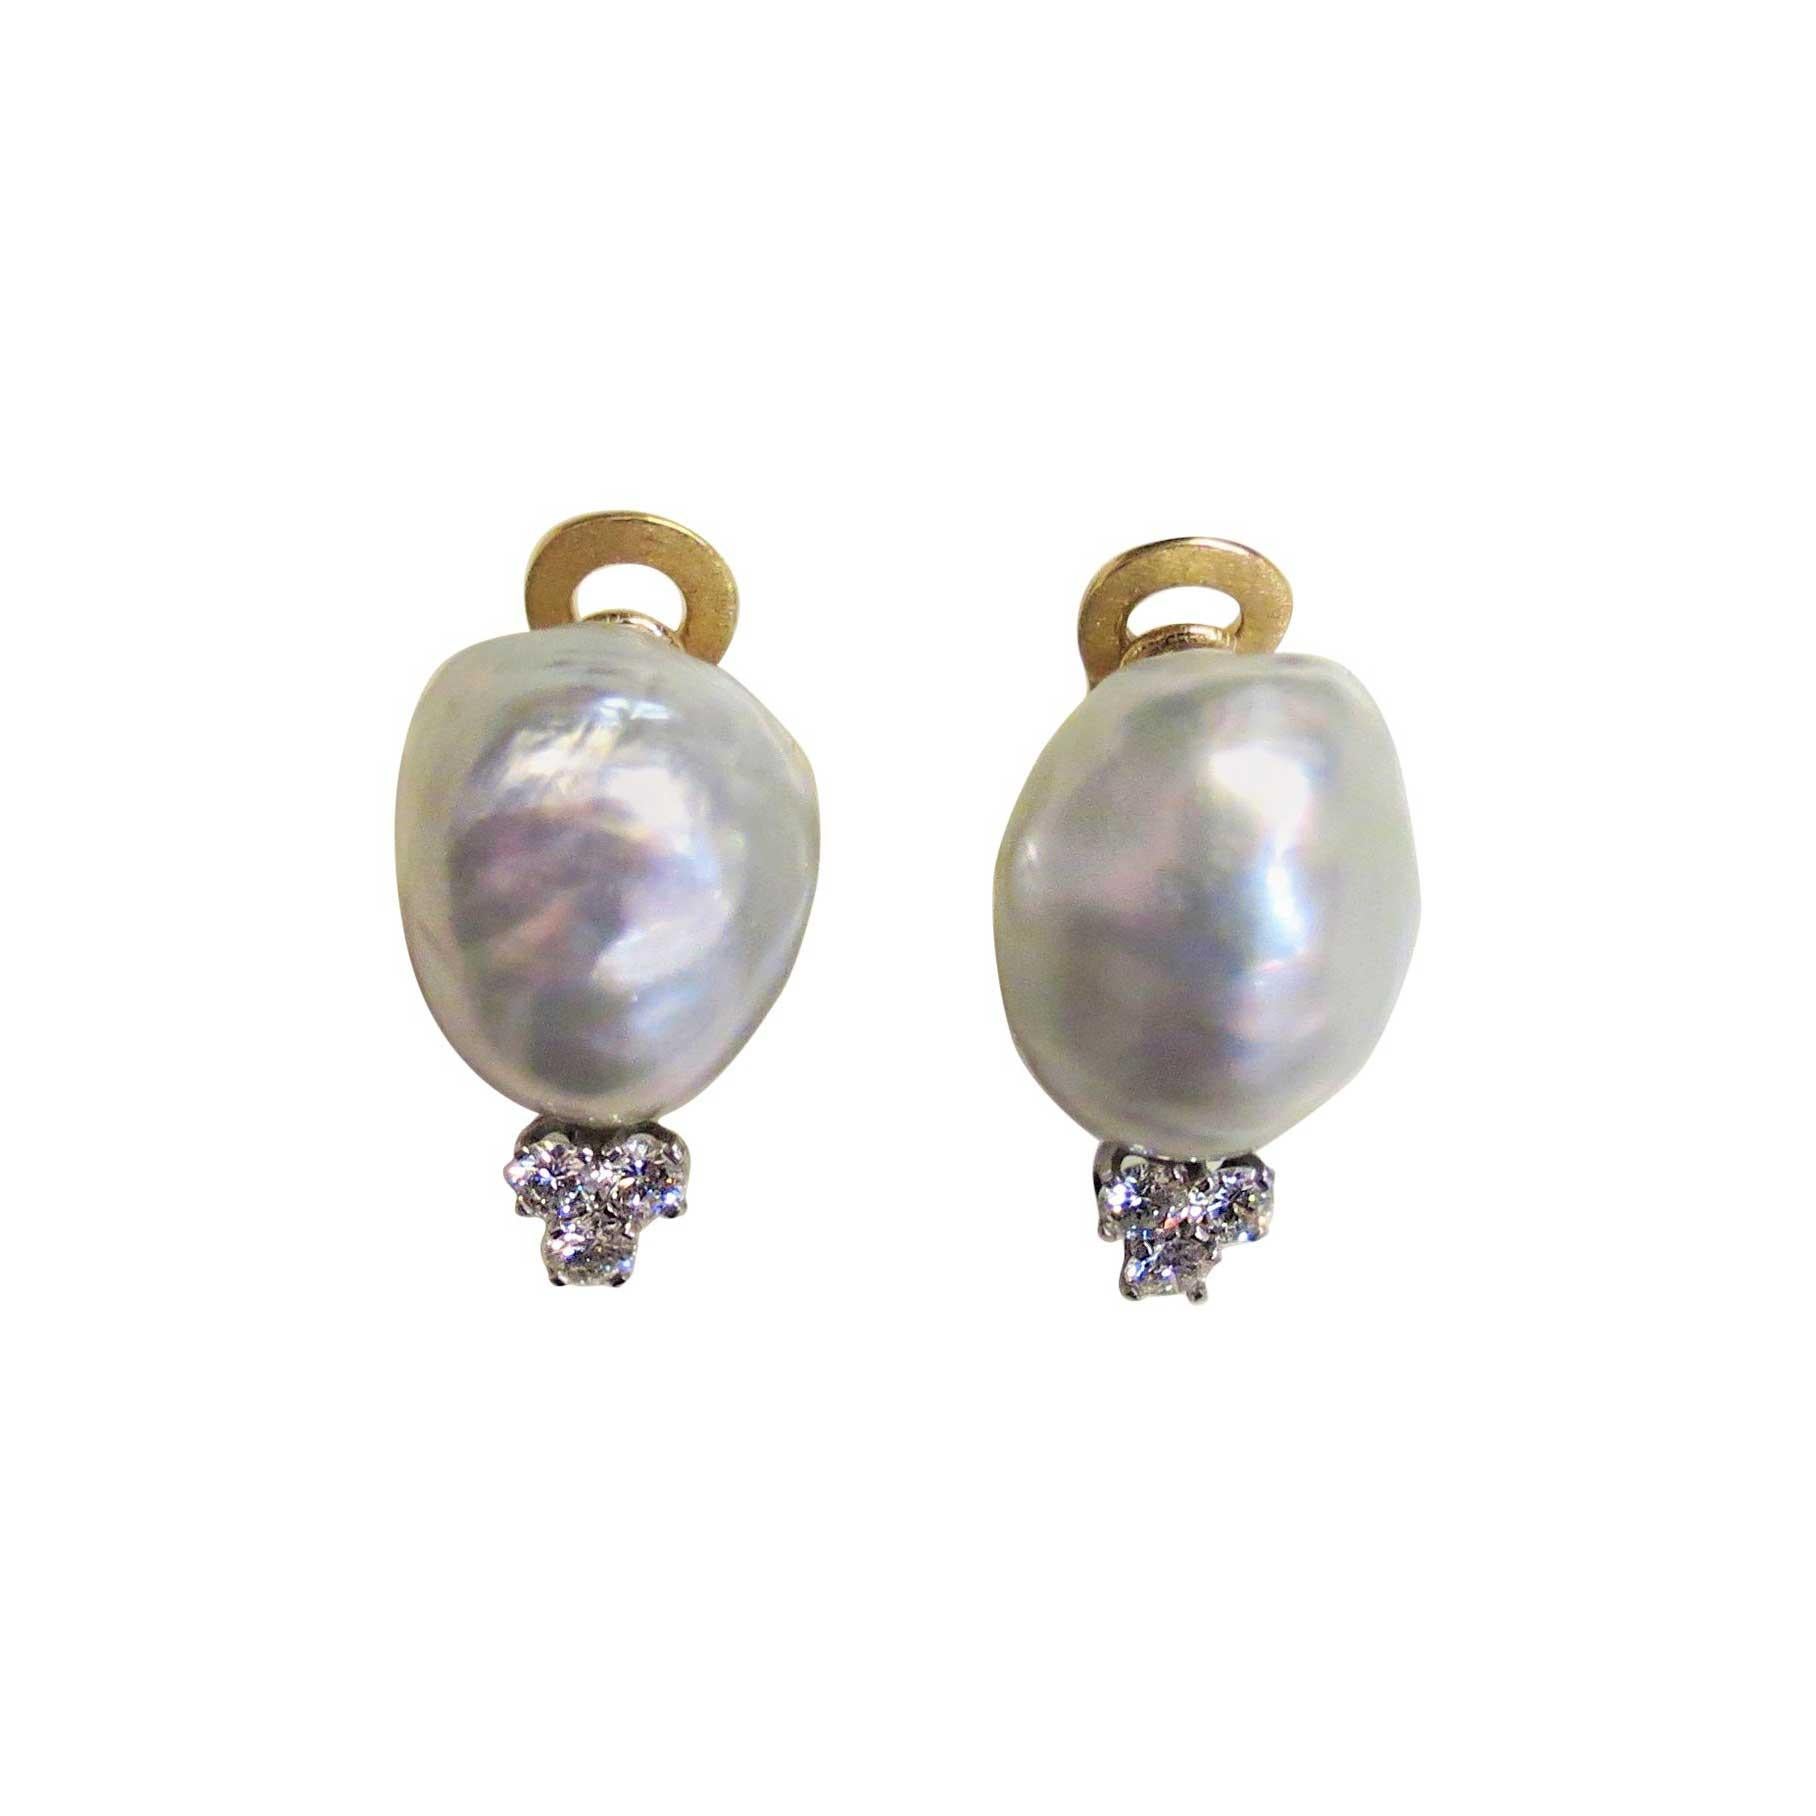 18 Karat Yellow Gold Baroque Freshwater Pearl and Diamond Clip Earrings